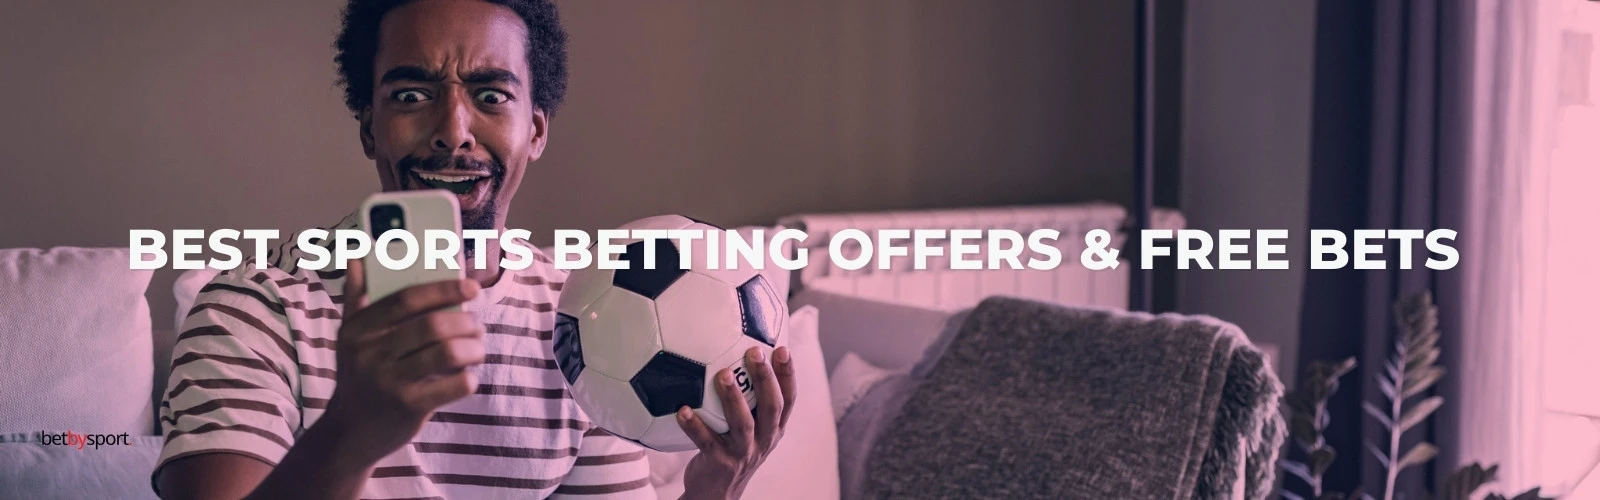 Best Sports Betting Offers